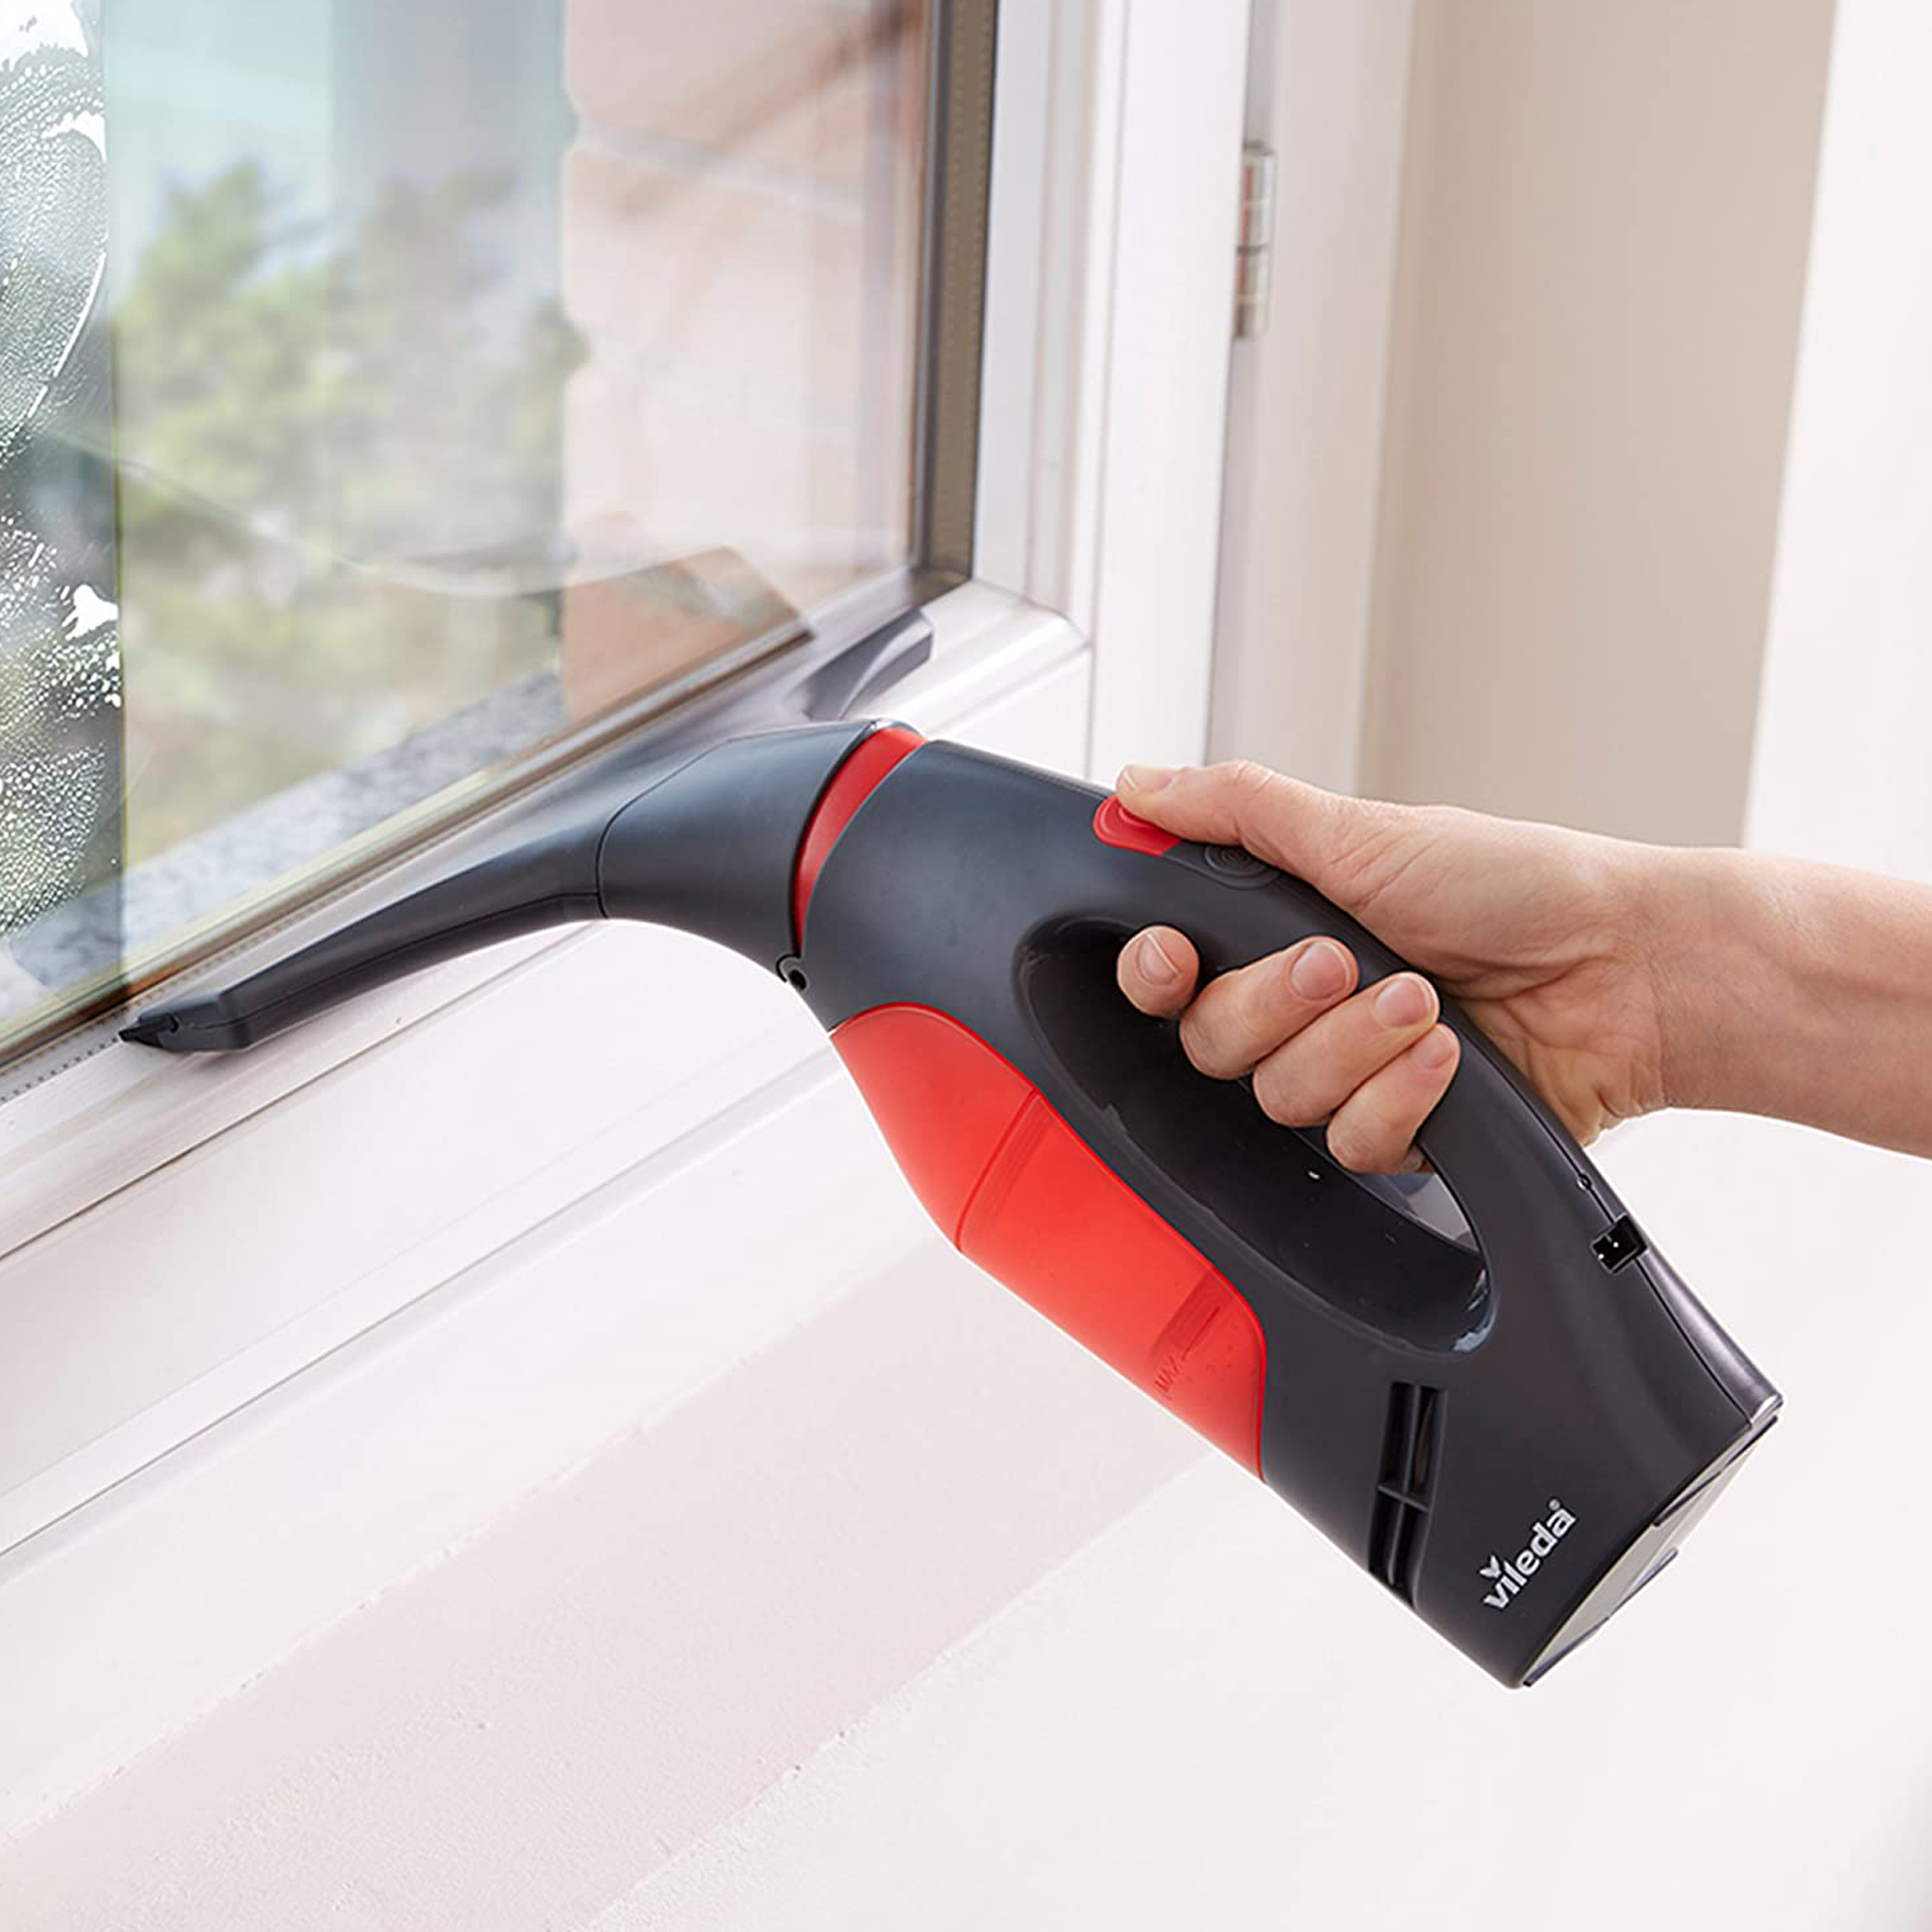 This window vacuum is my saviour for getting rid of condensation